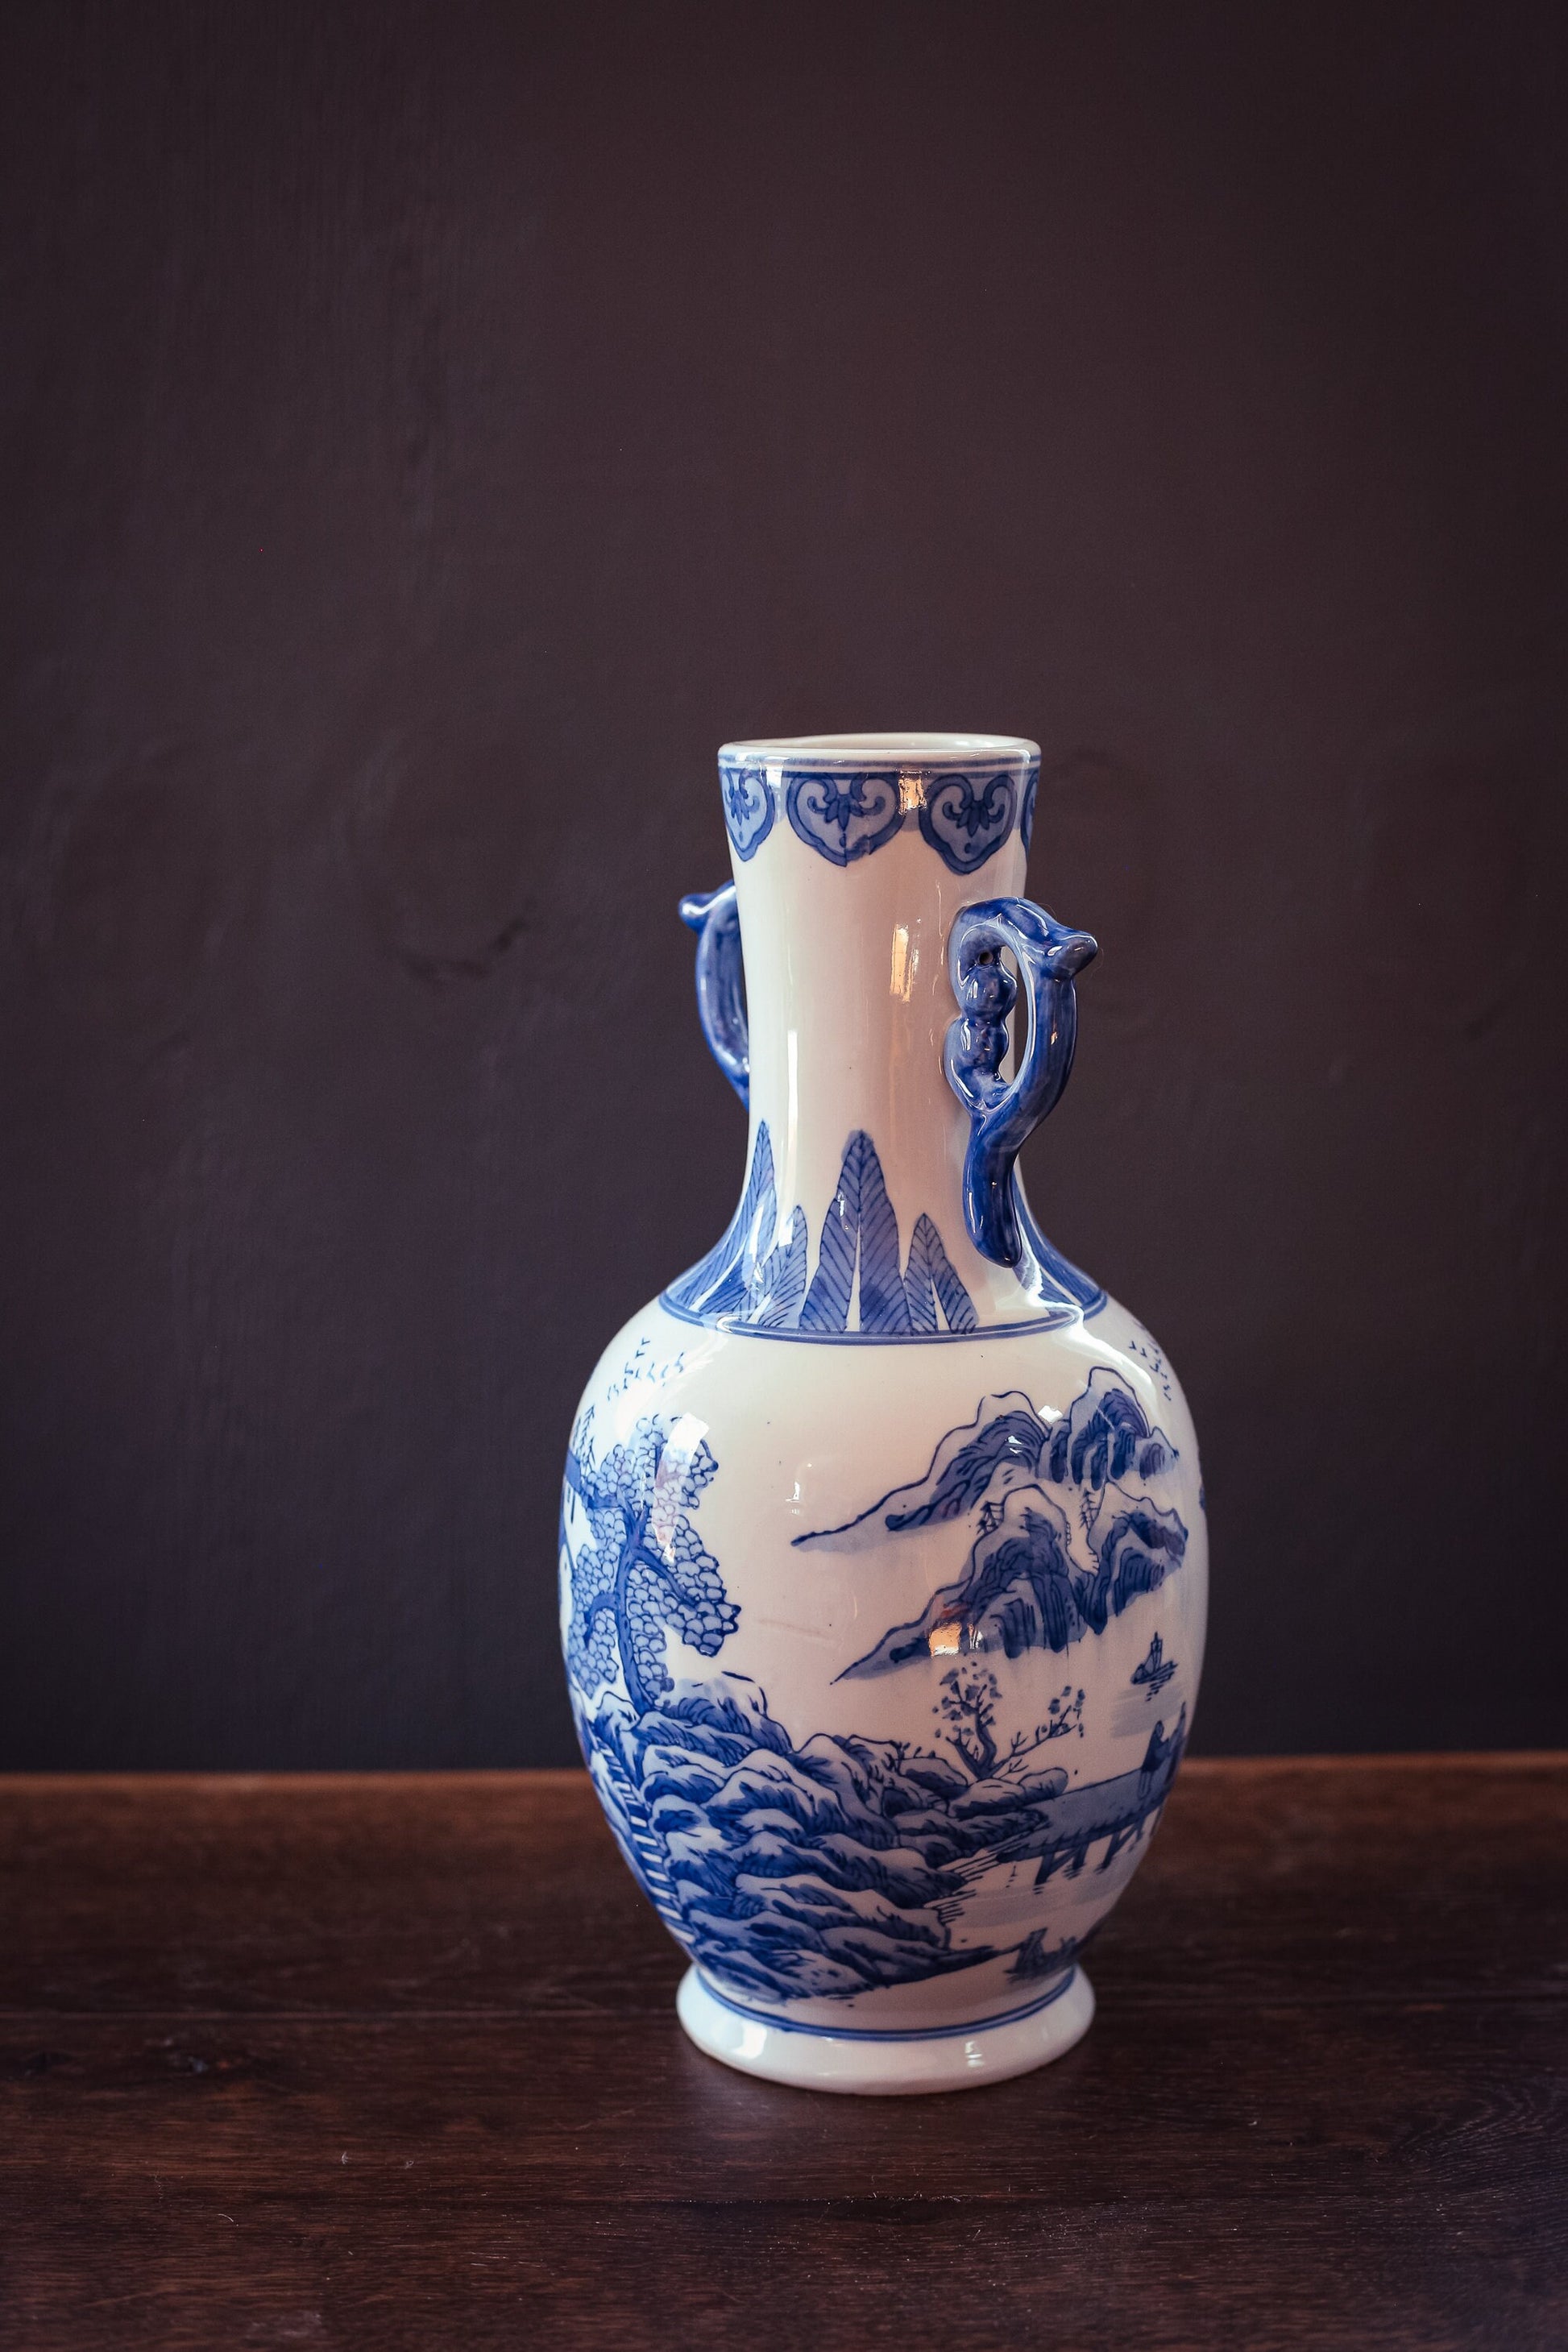 Tall Blue White Scenic Porcelain Vase with Handles - Vintage Chinese Hand Painted Scenic Vase